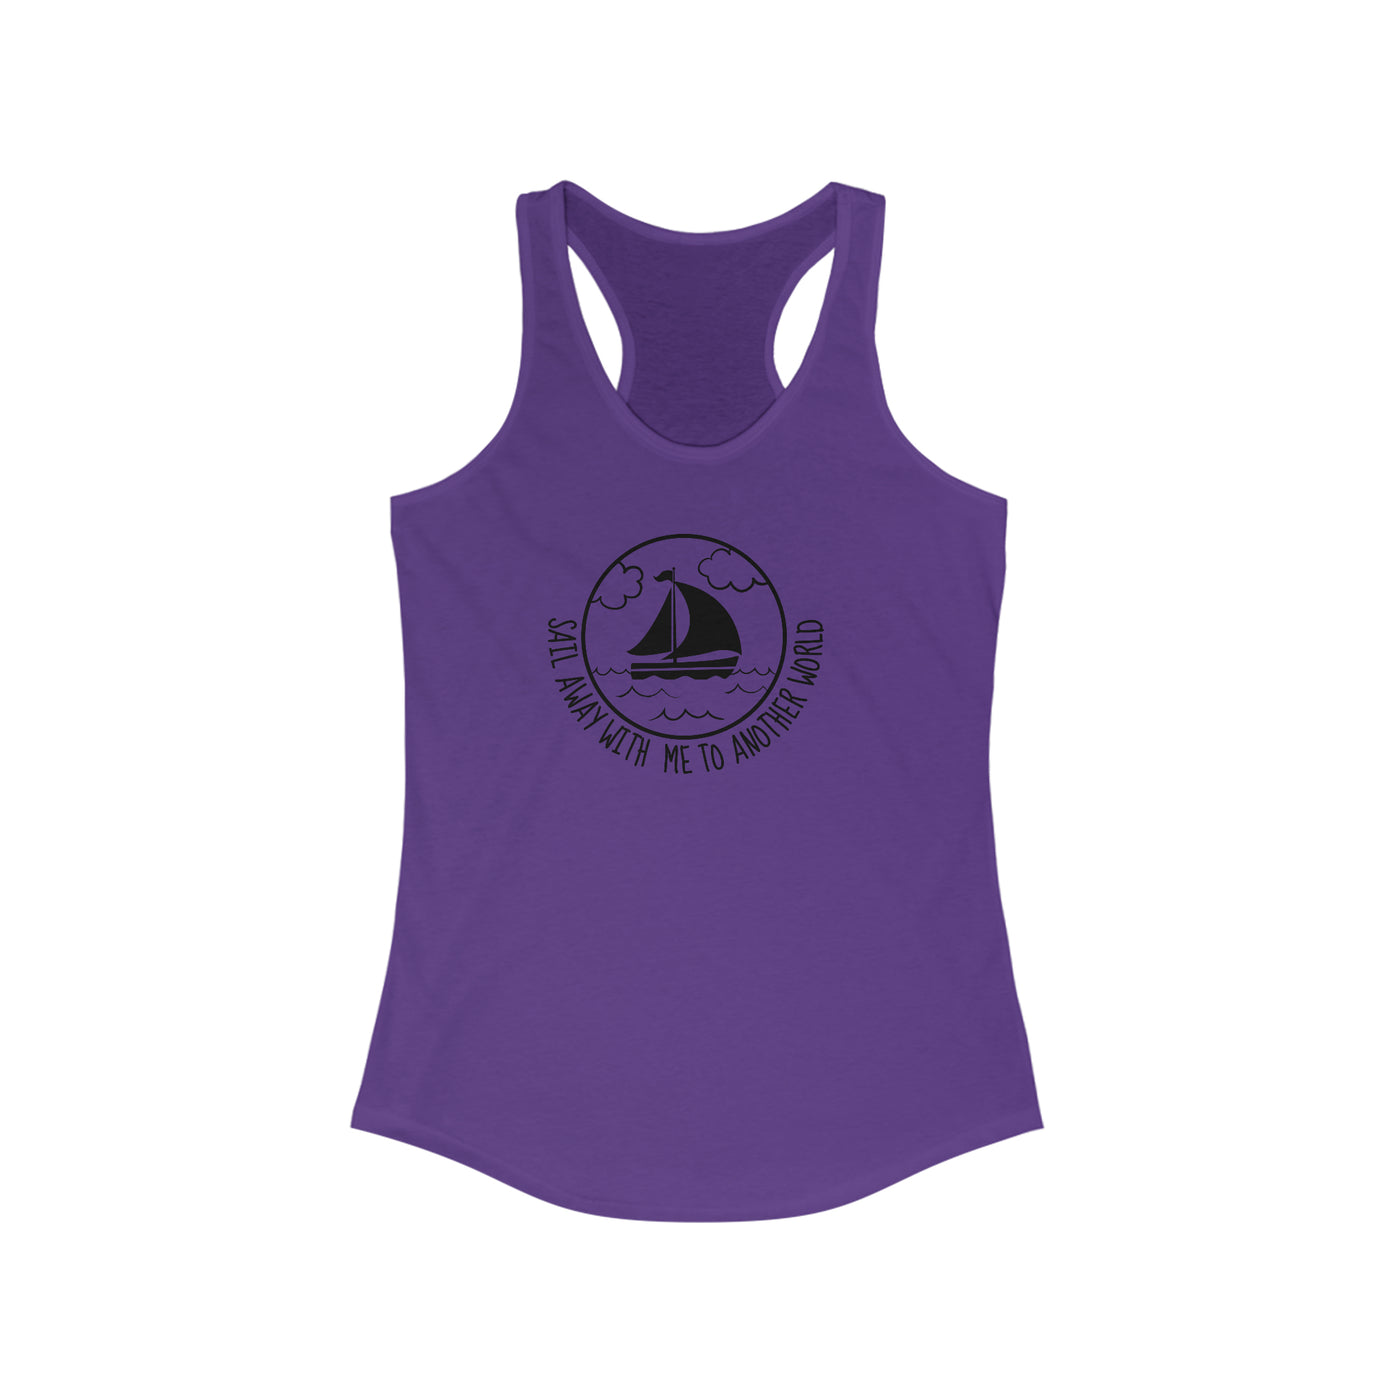 Sail away with me to another world Women's Ideal Racerback Tank